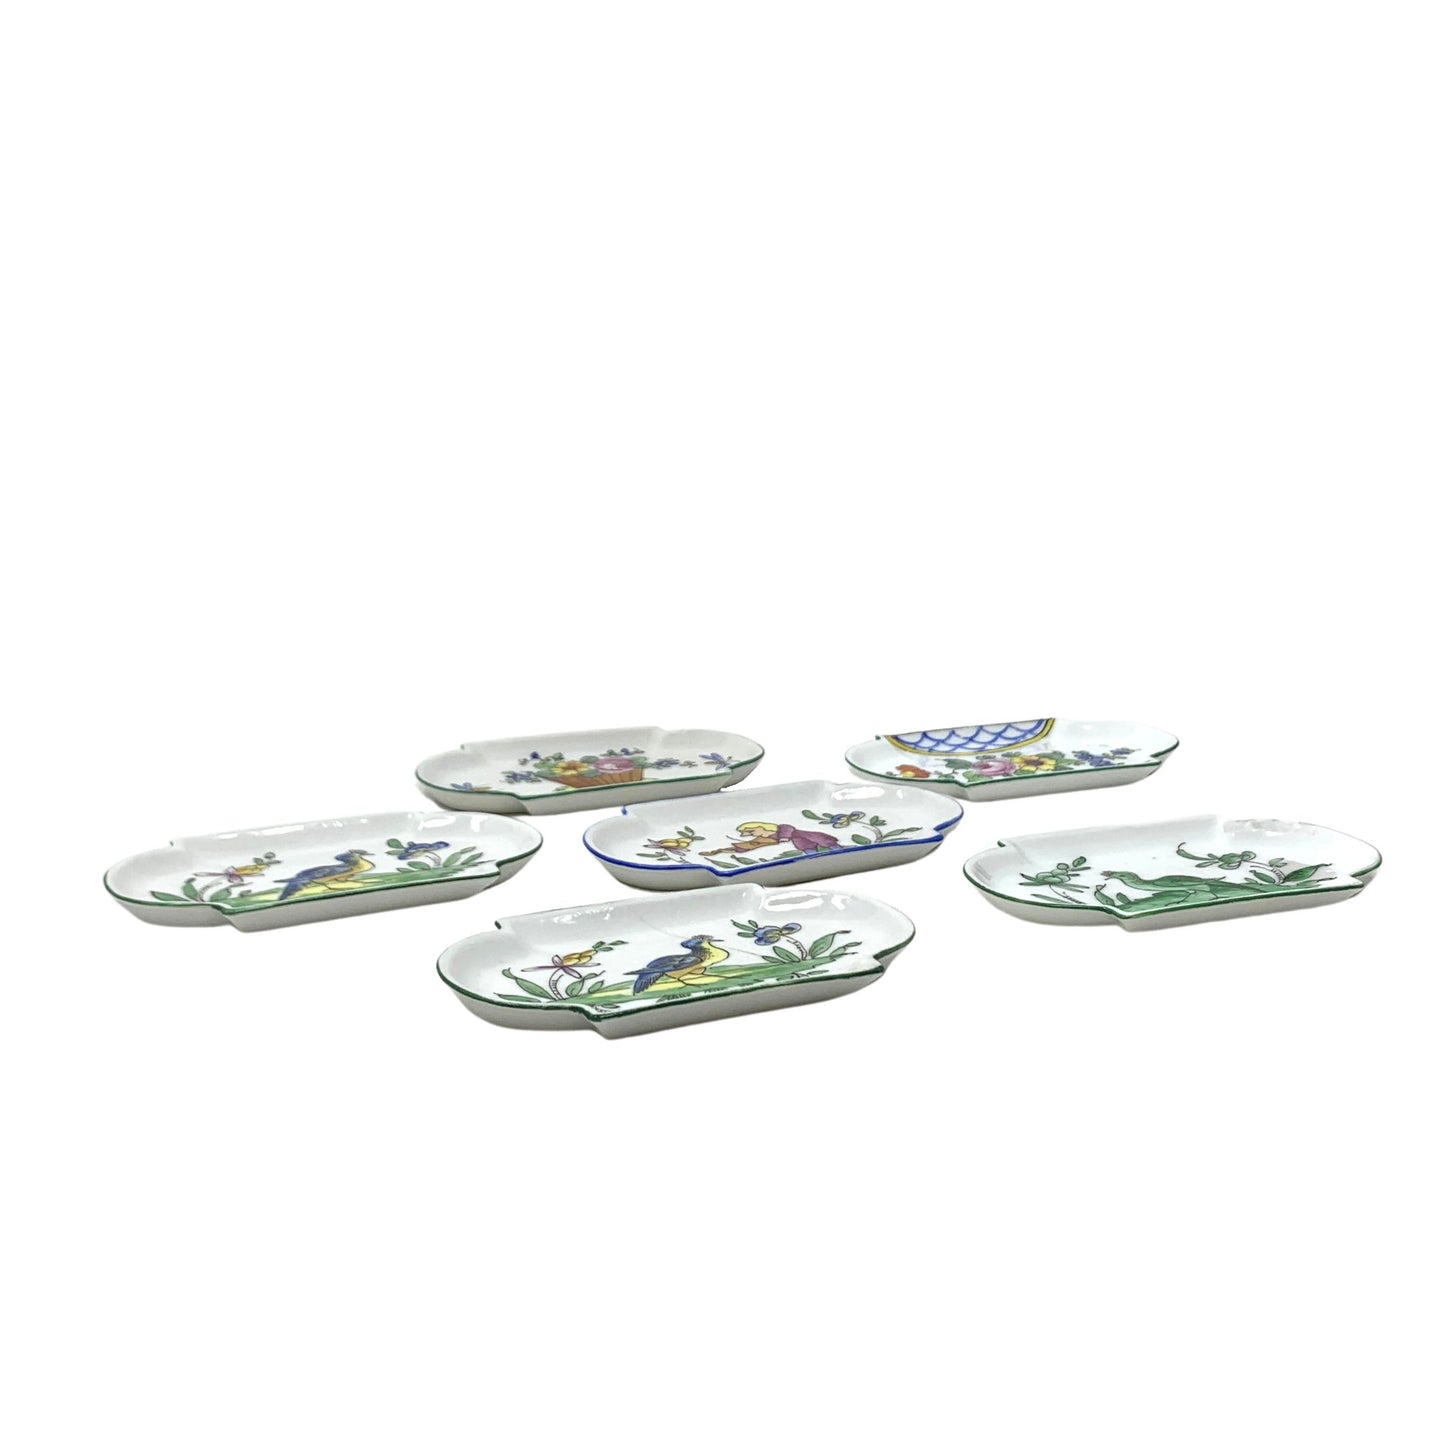 Aladin France Hand Painted Porcelain Butter Pats (6)